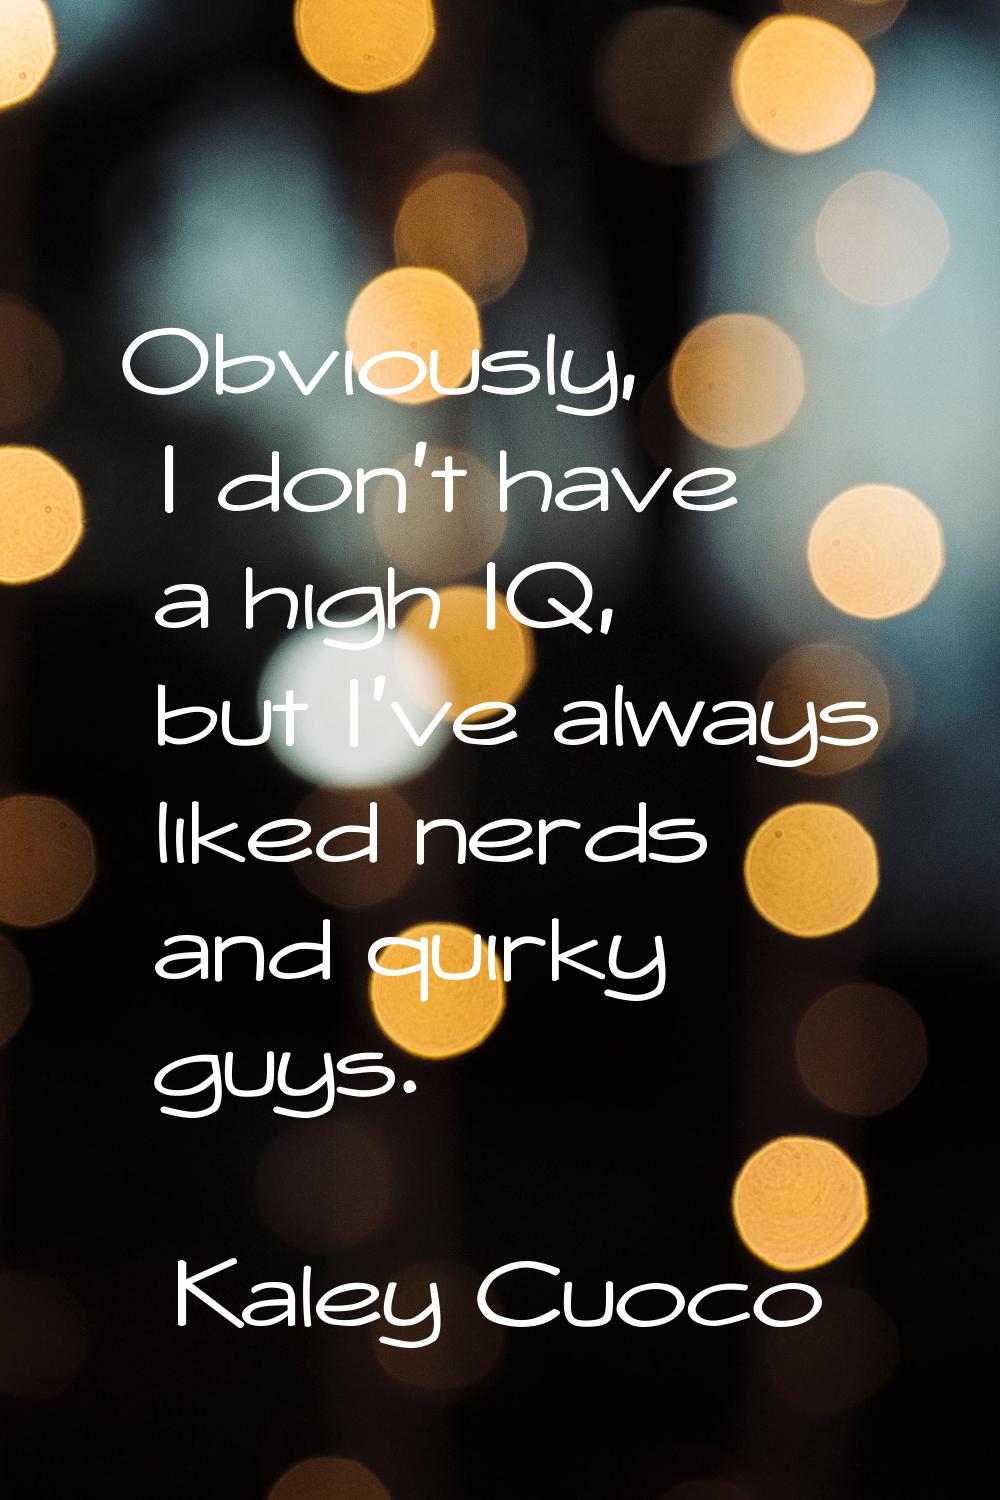 Obviously, I don't have a high IQ, but I've always liked nerds and quirky guys.